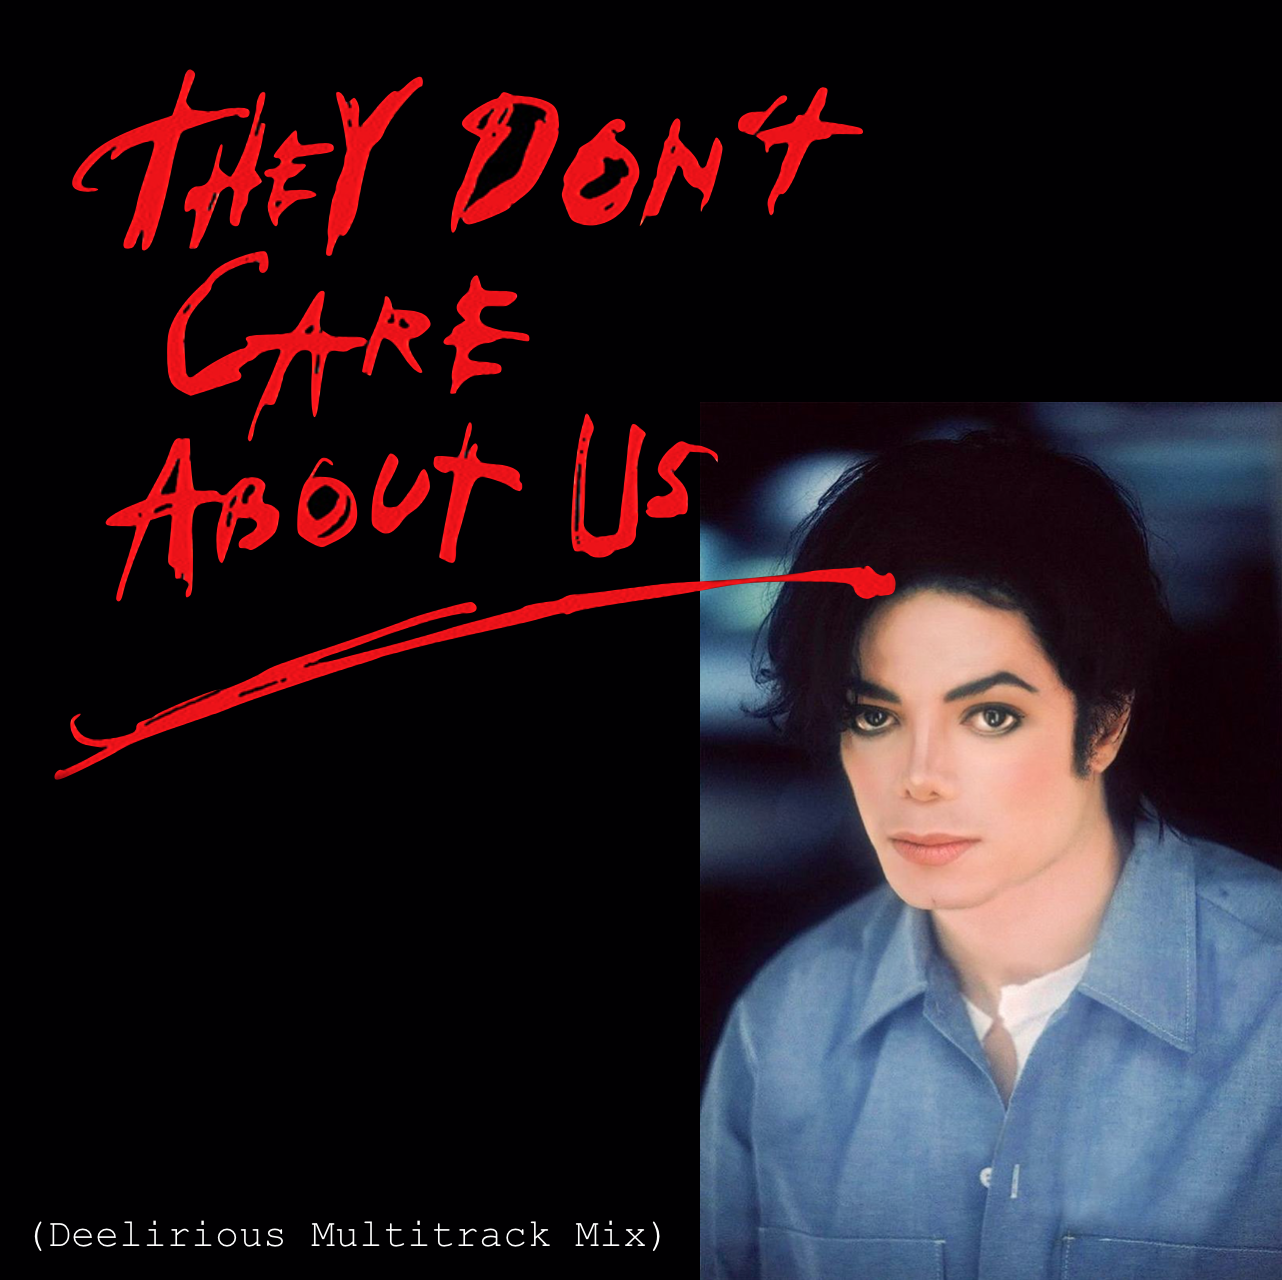 About us песня майкла. They don't Care about us Michael Jackson обложка.